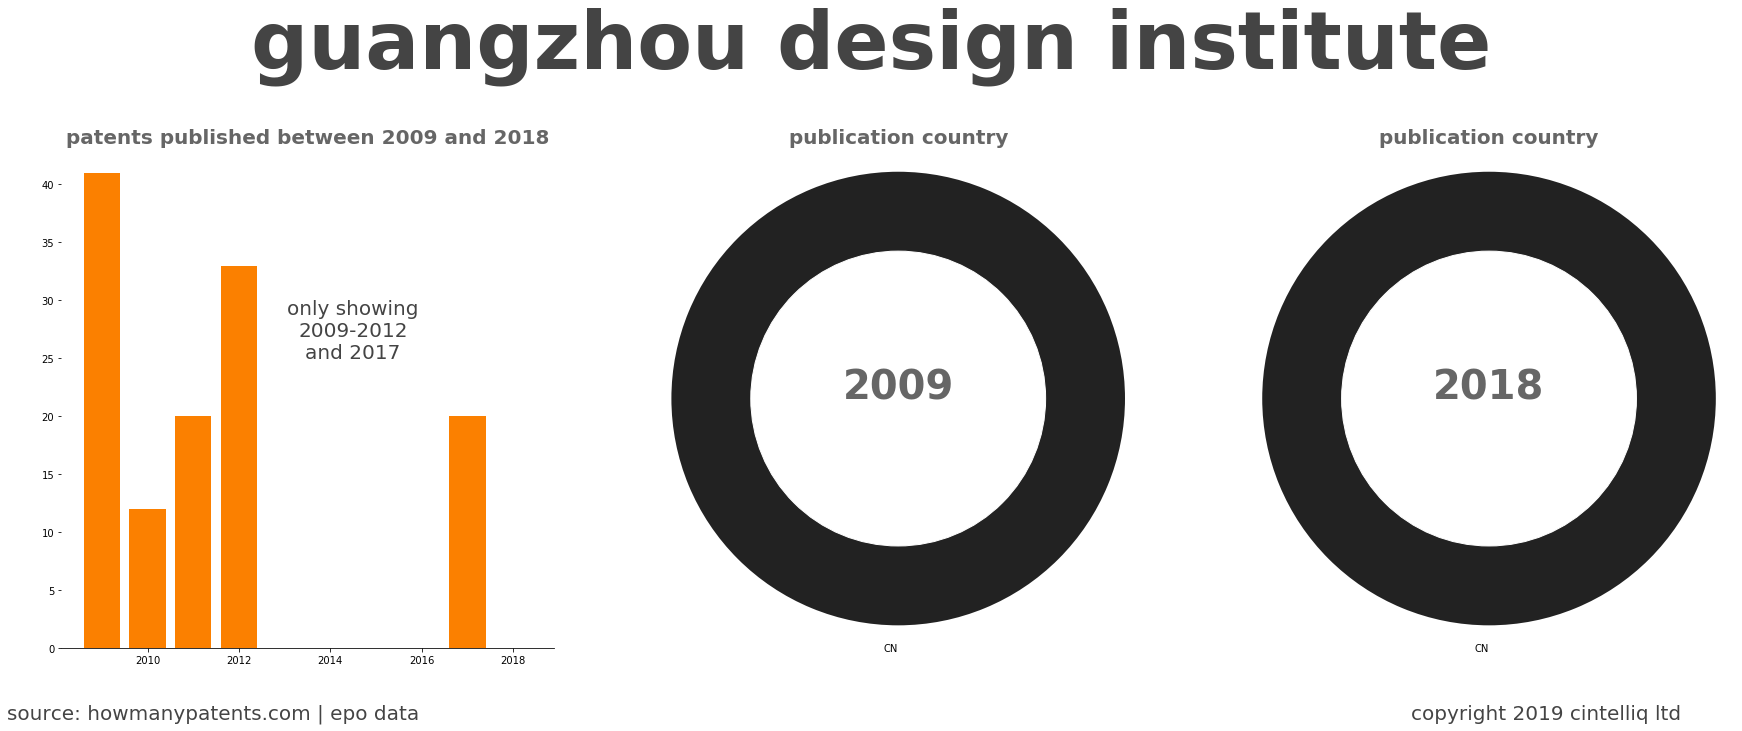 summary of patents for Guangzhou Design Institute